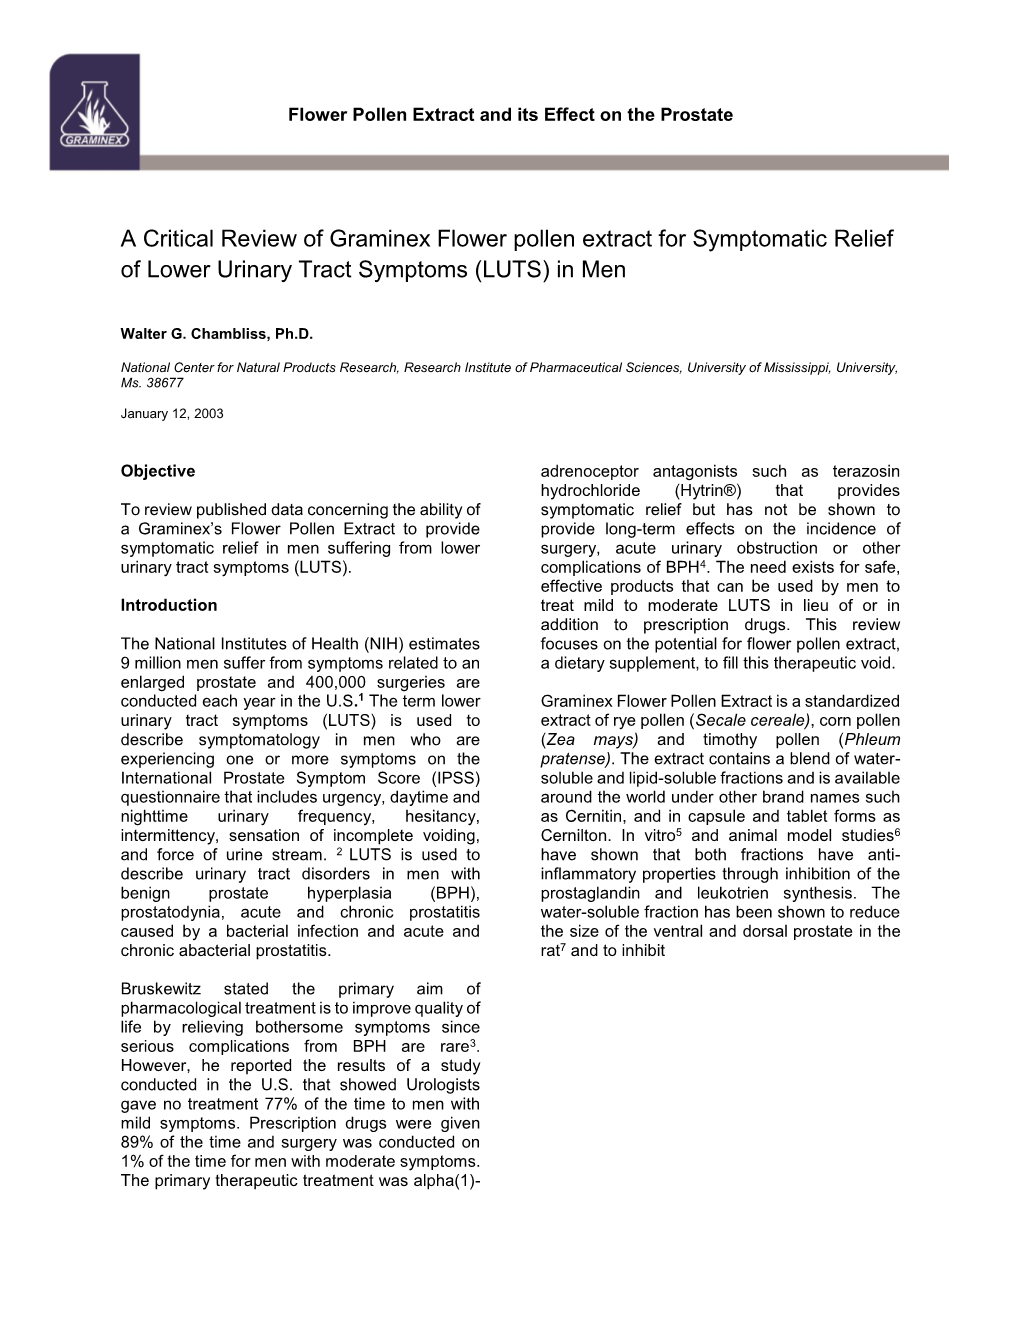 A Critical Review of Graminex Flower Pollen Extract for Symptomatic Relief of Lower Urinary Tract Symptoms (LUTS) in Men